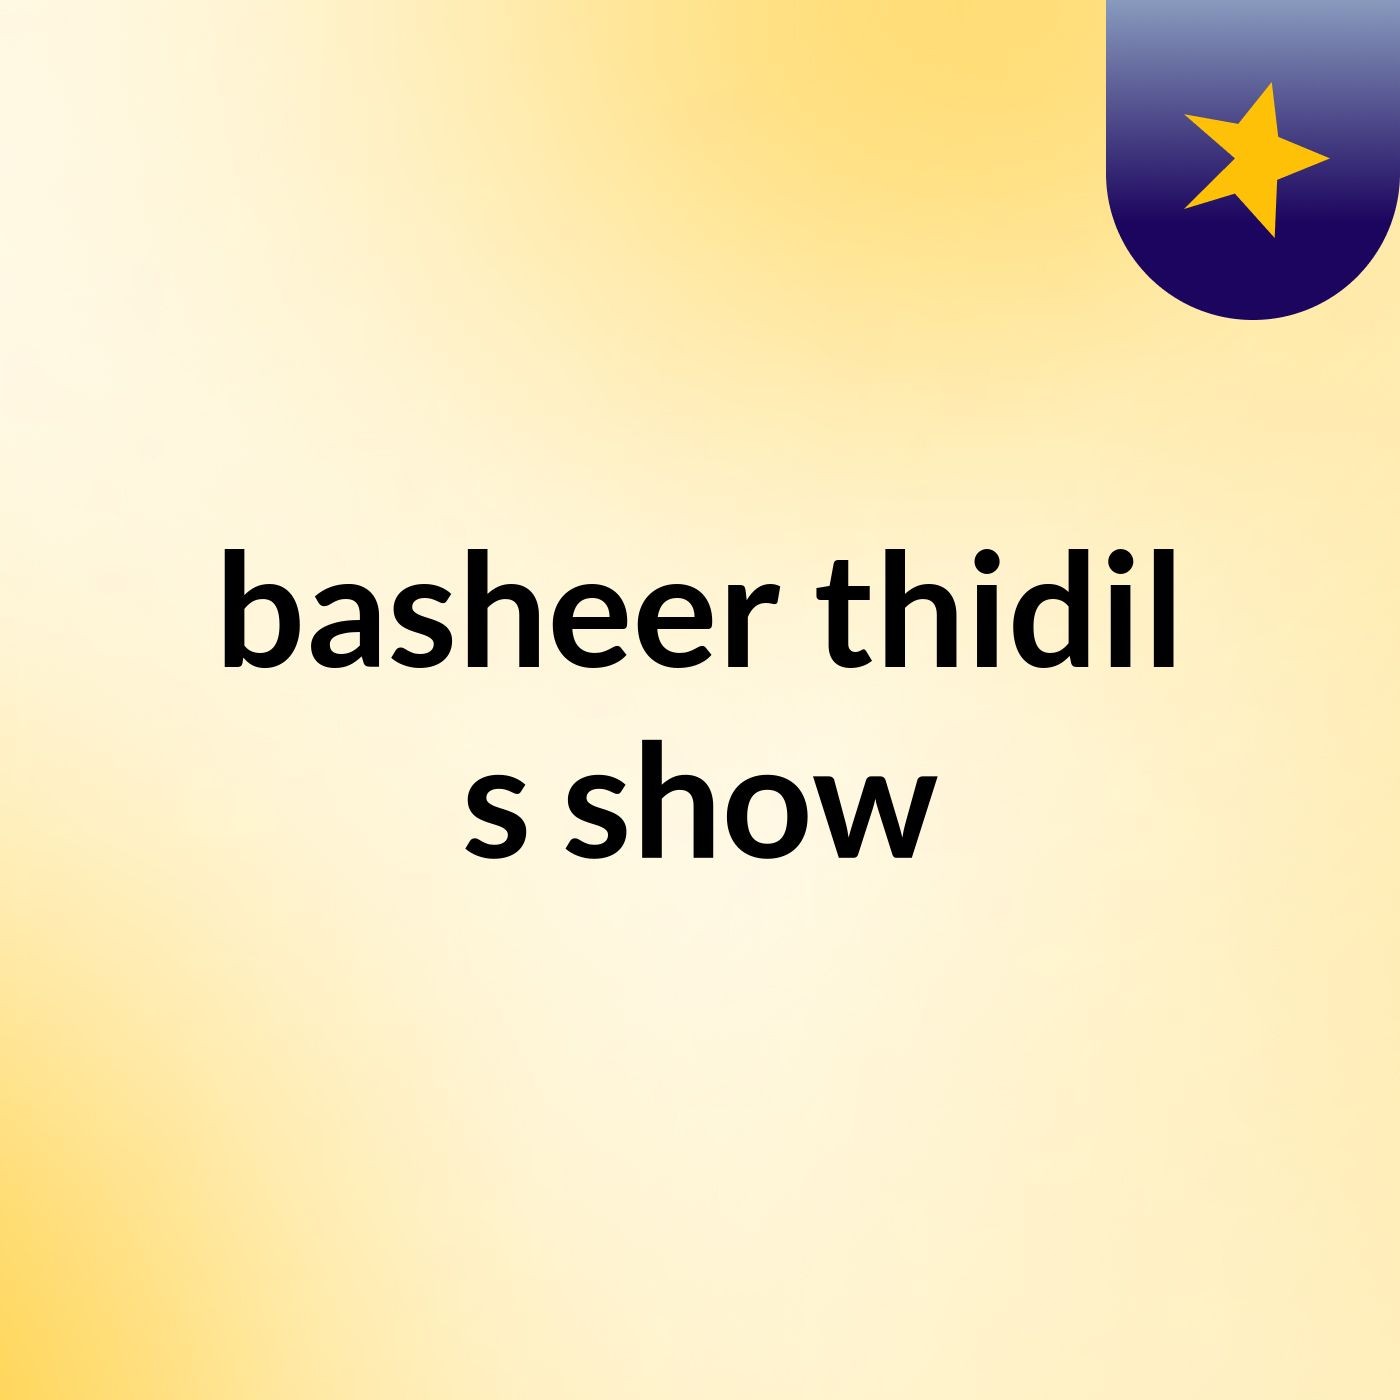 basheer thidil's show